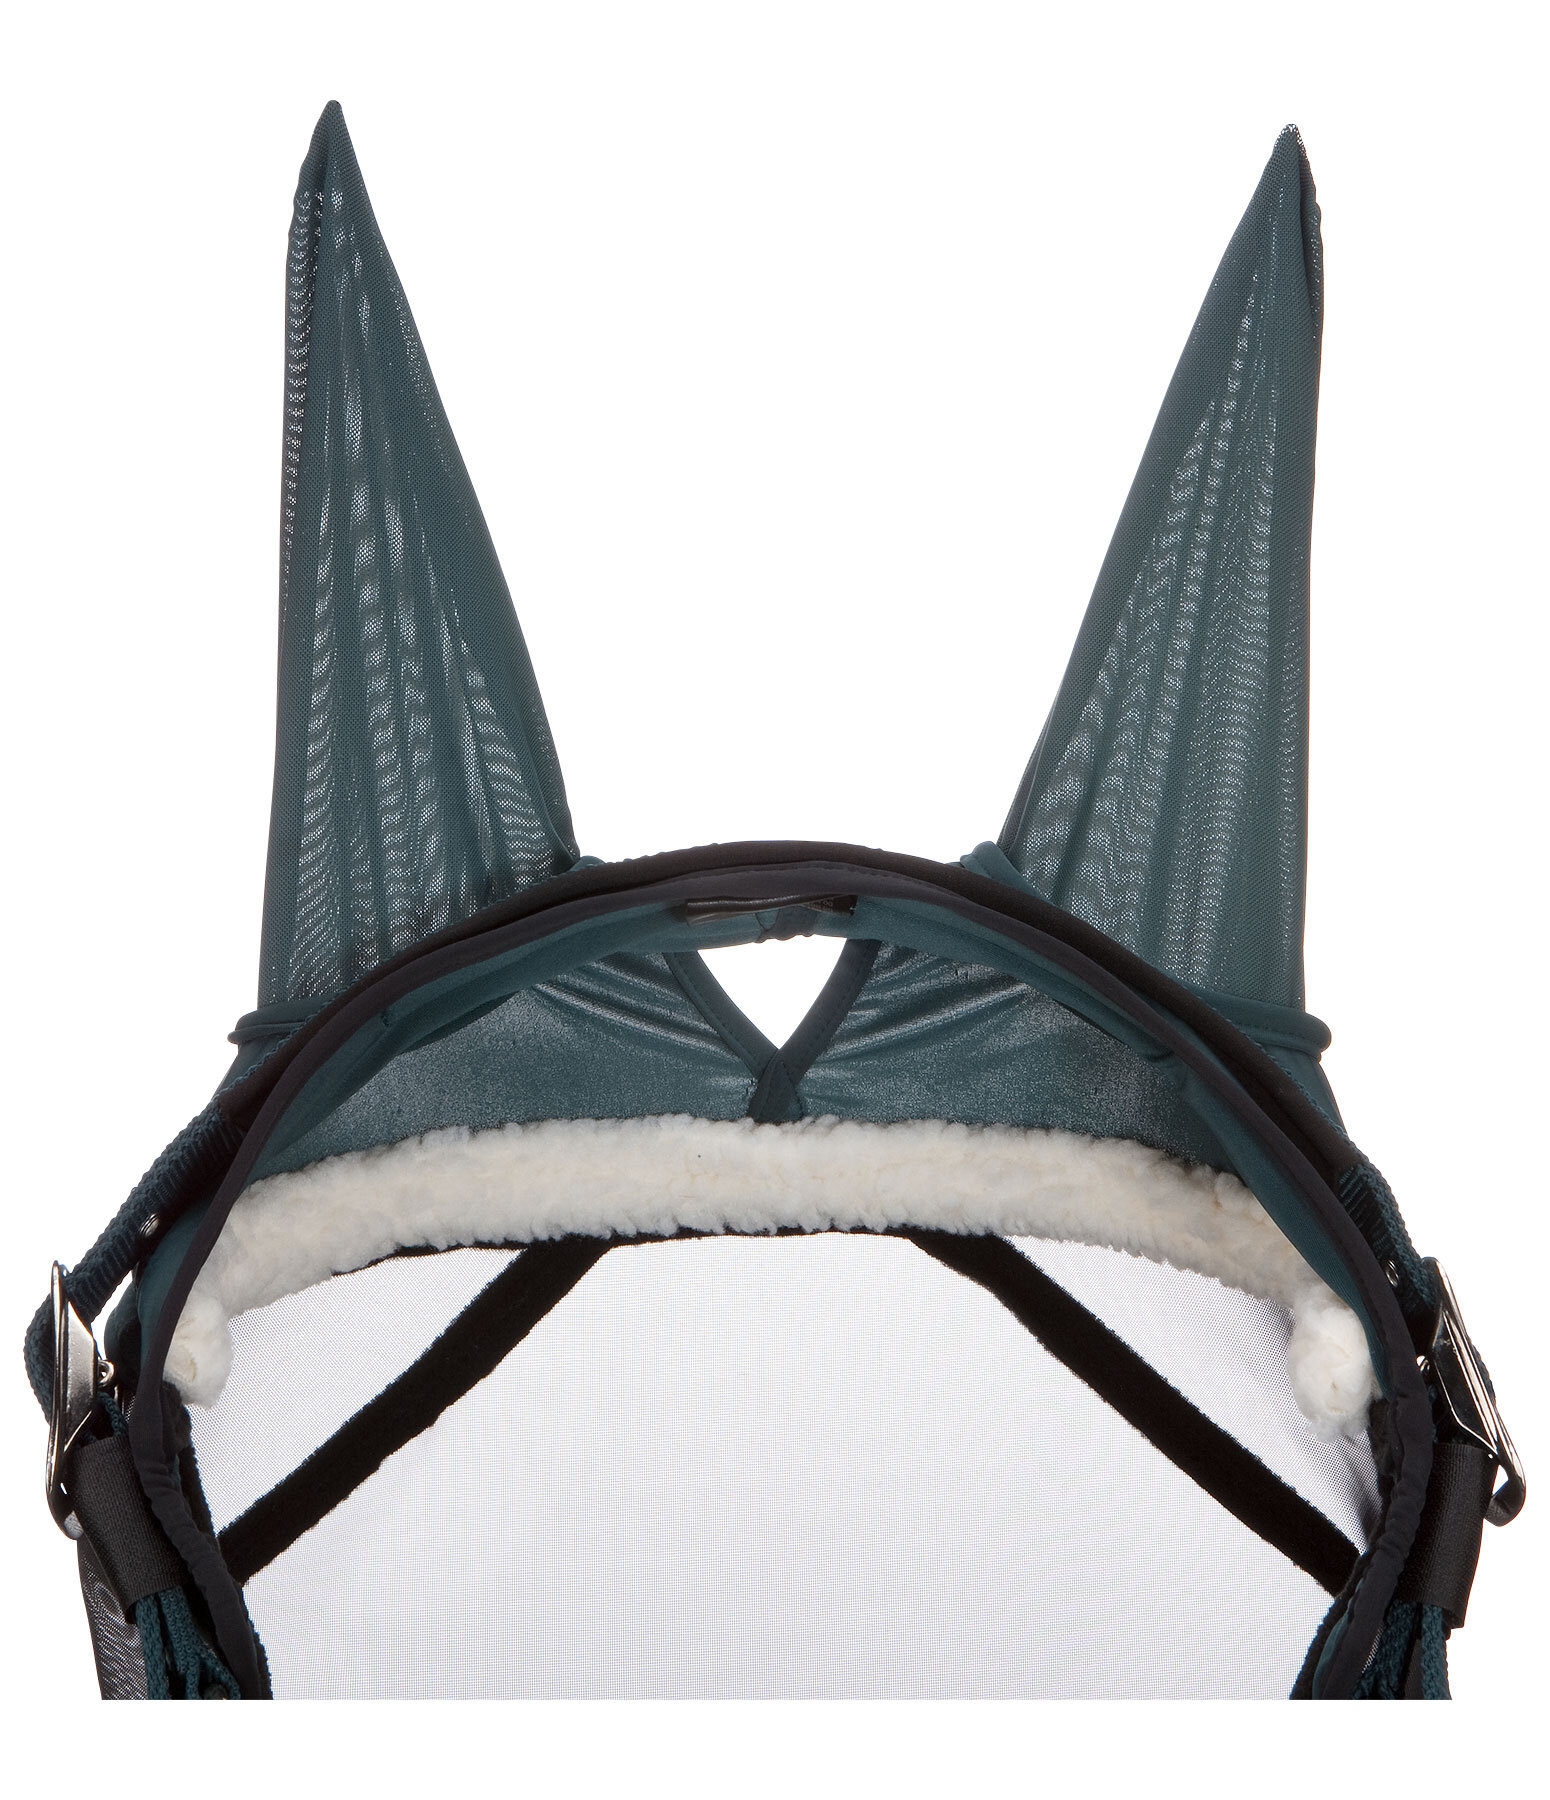 Fly Protection Headcollar with Integrated Fly Mask All-In-One